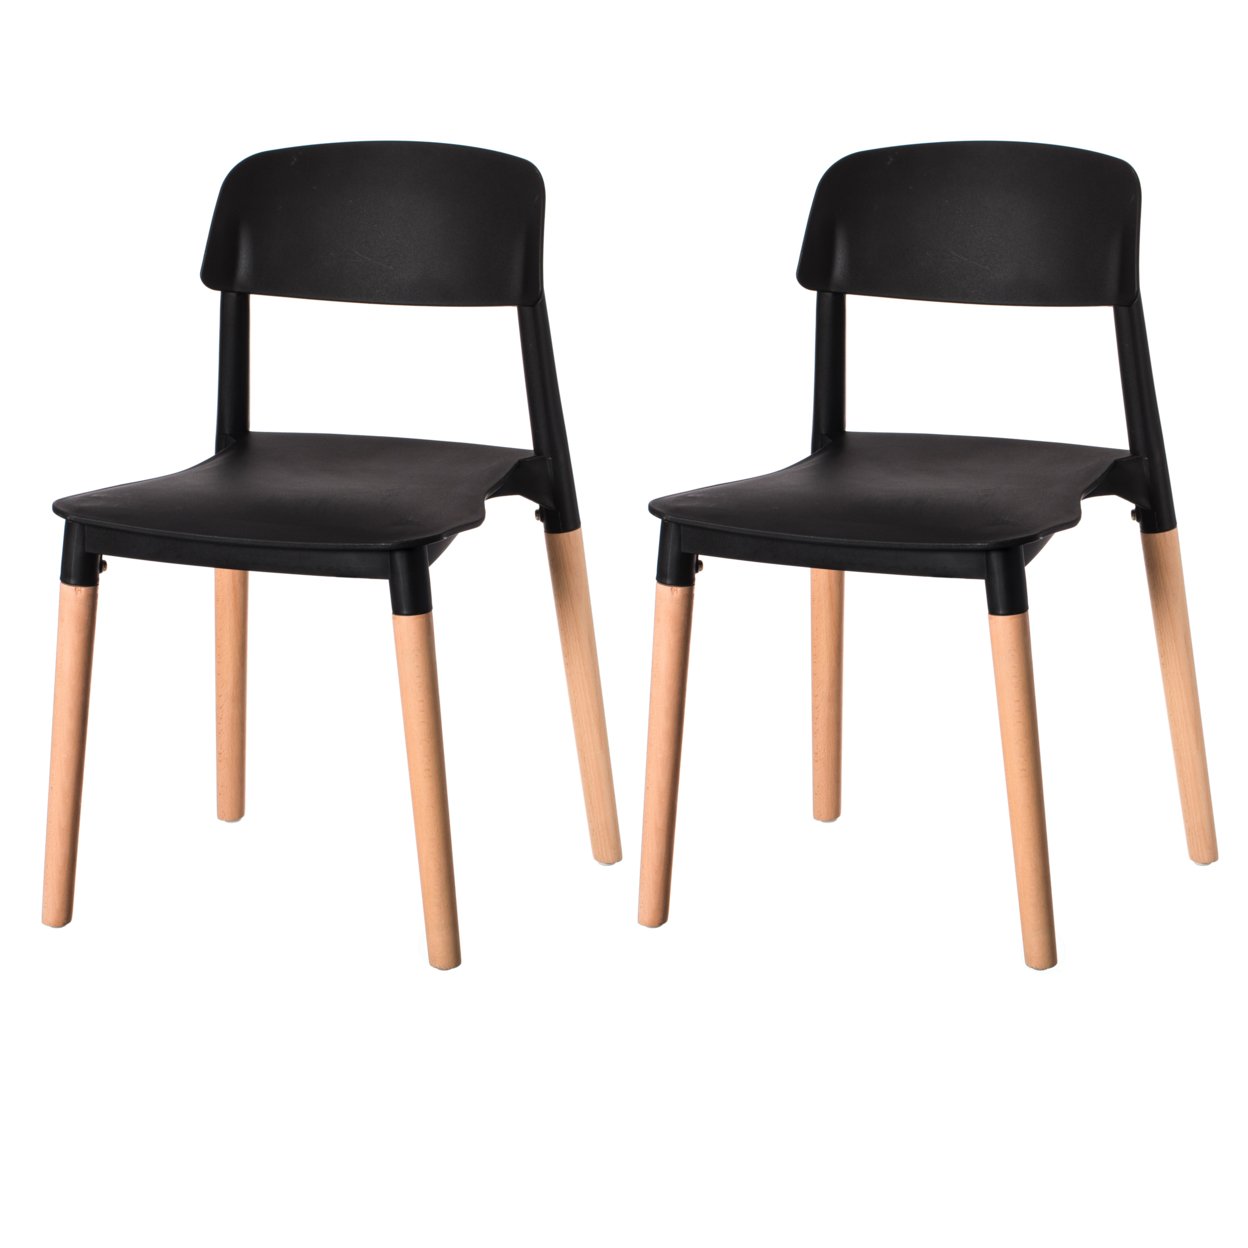 Modern Plastic Dining Chair Open Back With Beech Wood Legs - Set Of 2 Black